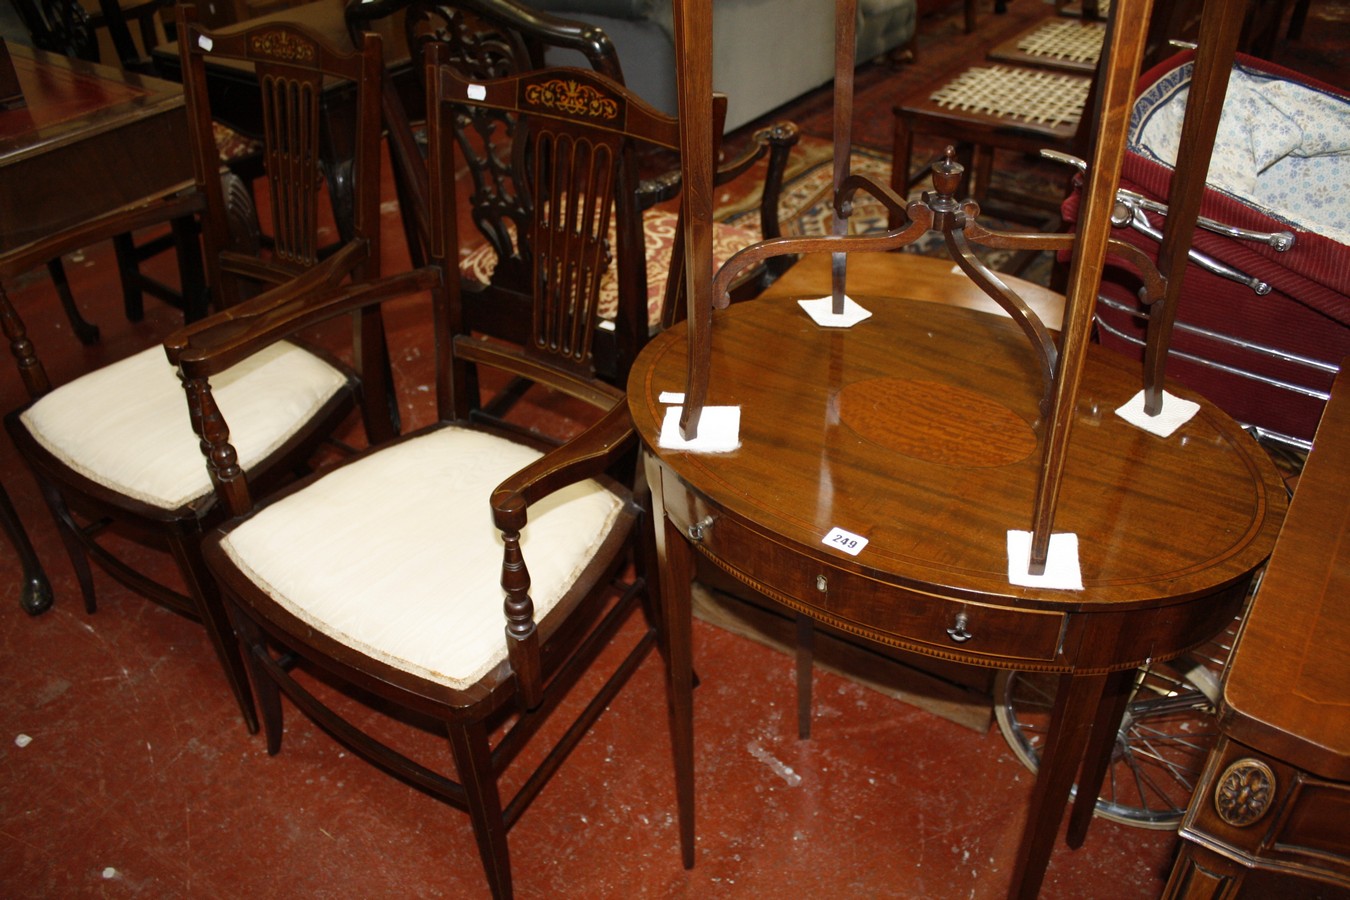 An Edwardian mahogany and inlaid oval table, two Edwardian elbow chairs and an oval table